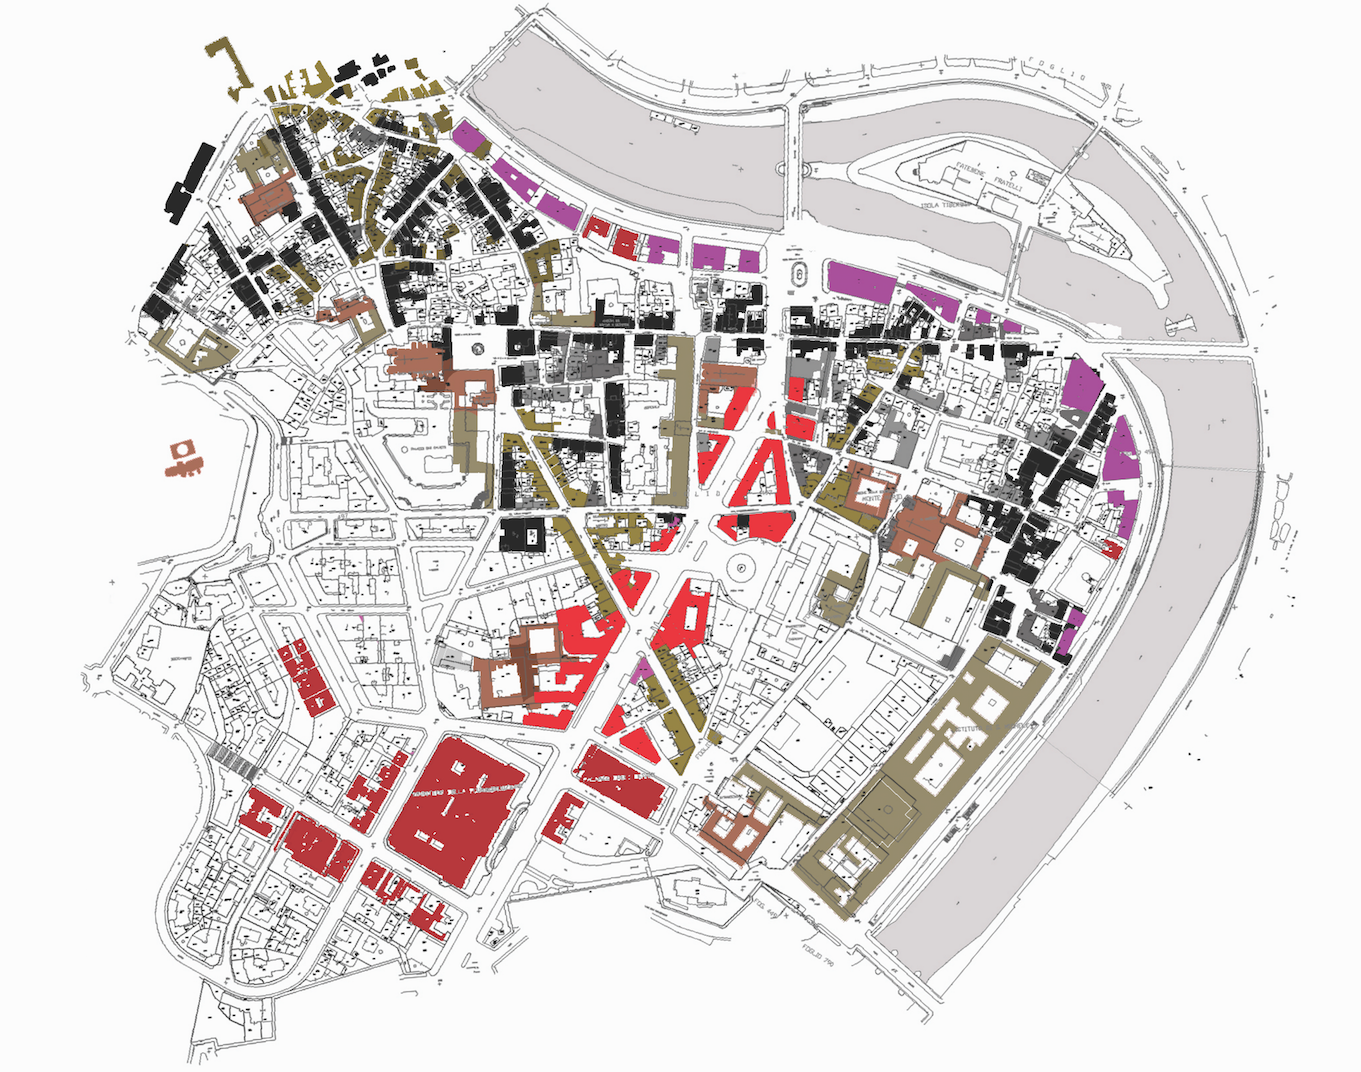 URBAN MORPHOLOGY APPROACHES-BRIEFING PAPERS